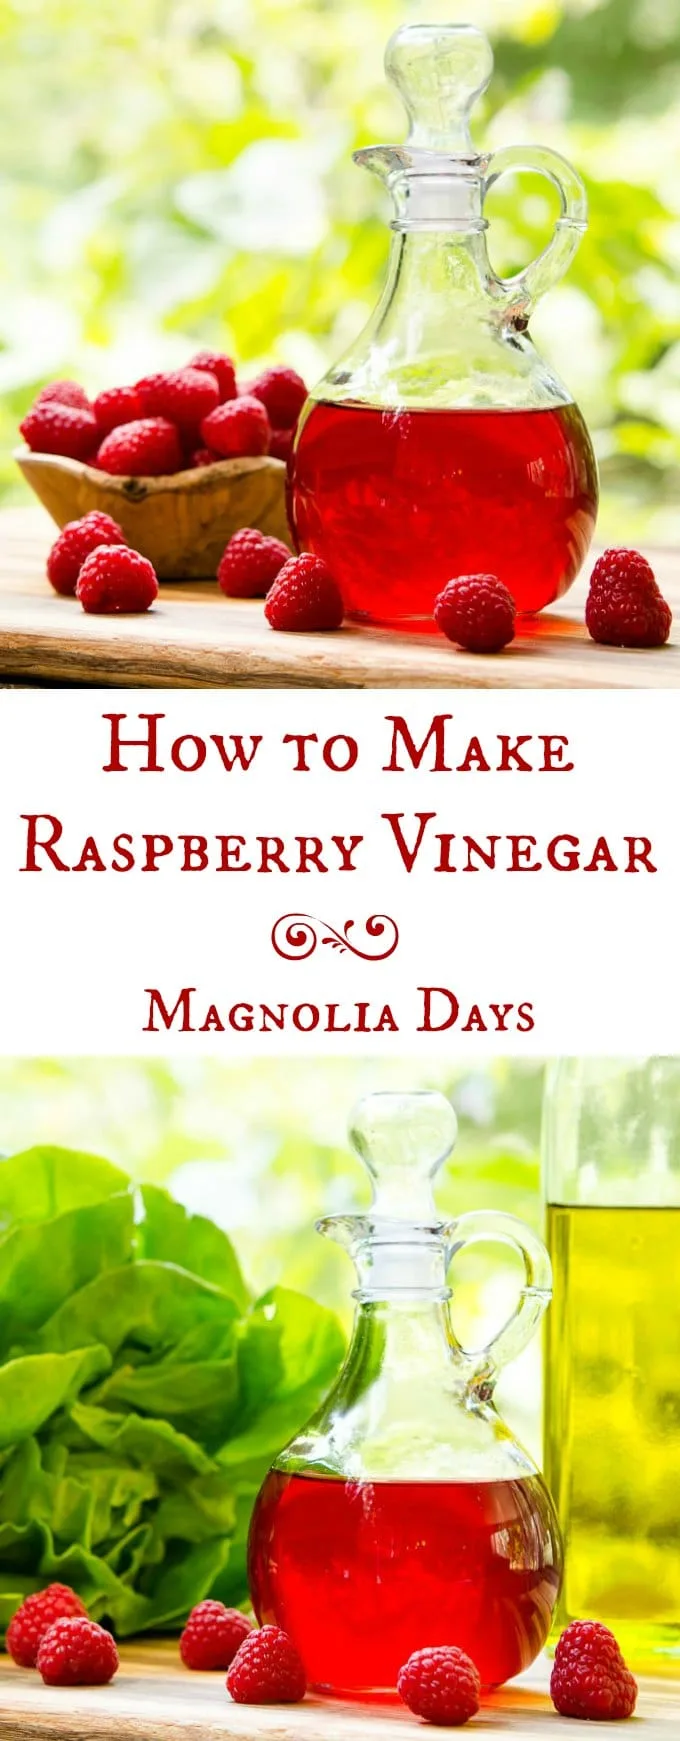 How to make raspberry vinegar by infusing fresh raspberries into vinegar. It's so easy to do. The vinegar has bright berry flavor and a hint of lemon. It's great for salads, dressings, and to give as gifts.